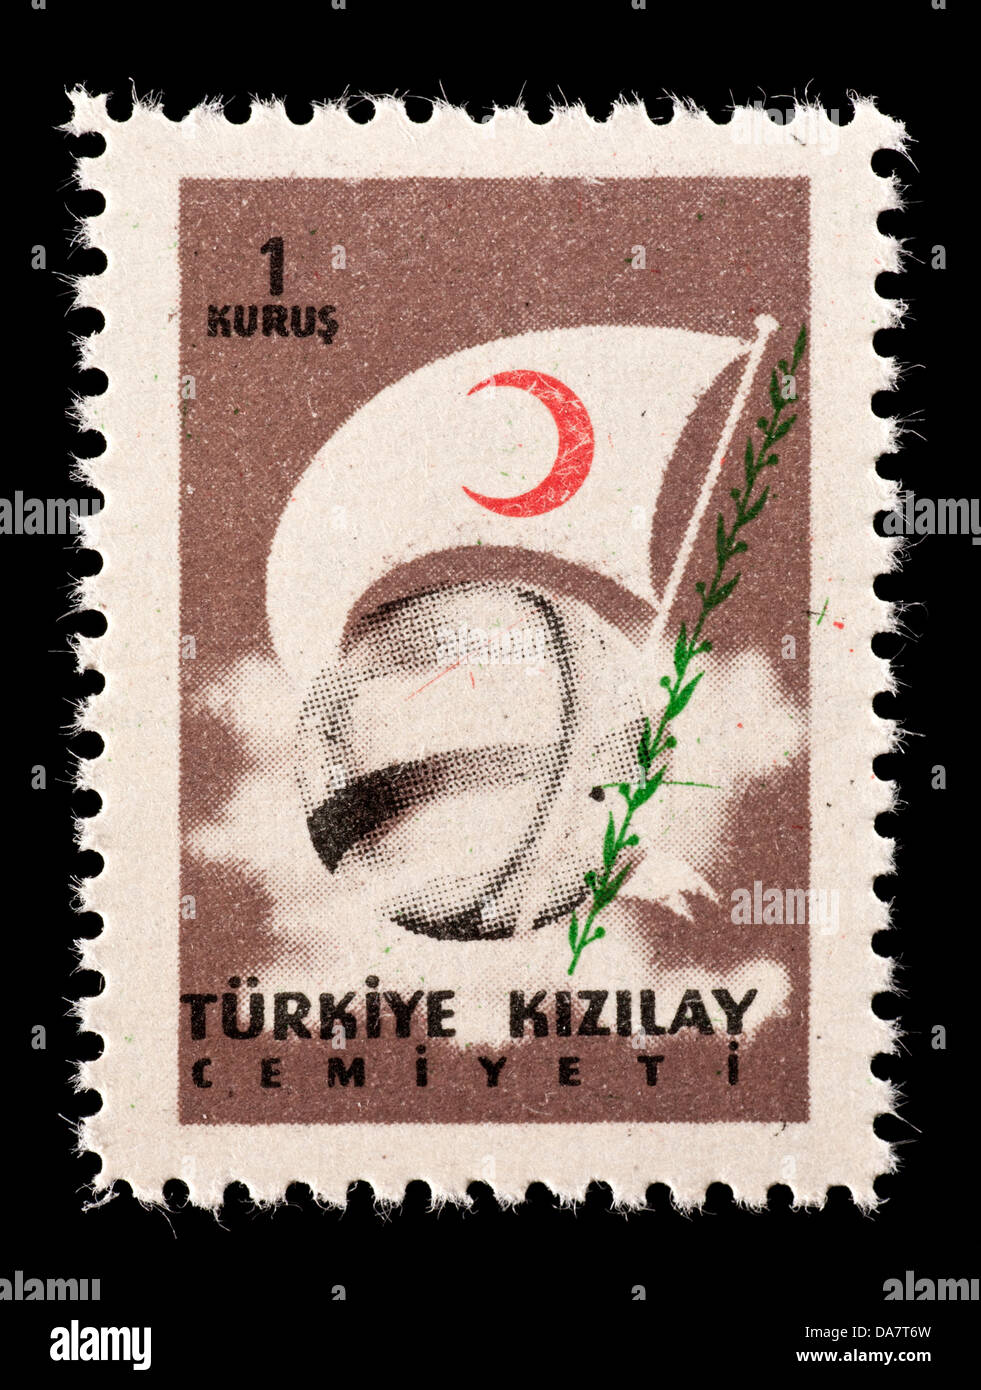 Postal tax stamp from Turkey depicting a globe and the flag of the Red Crescent. Stock Photo